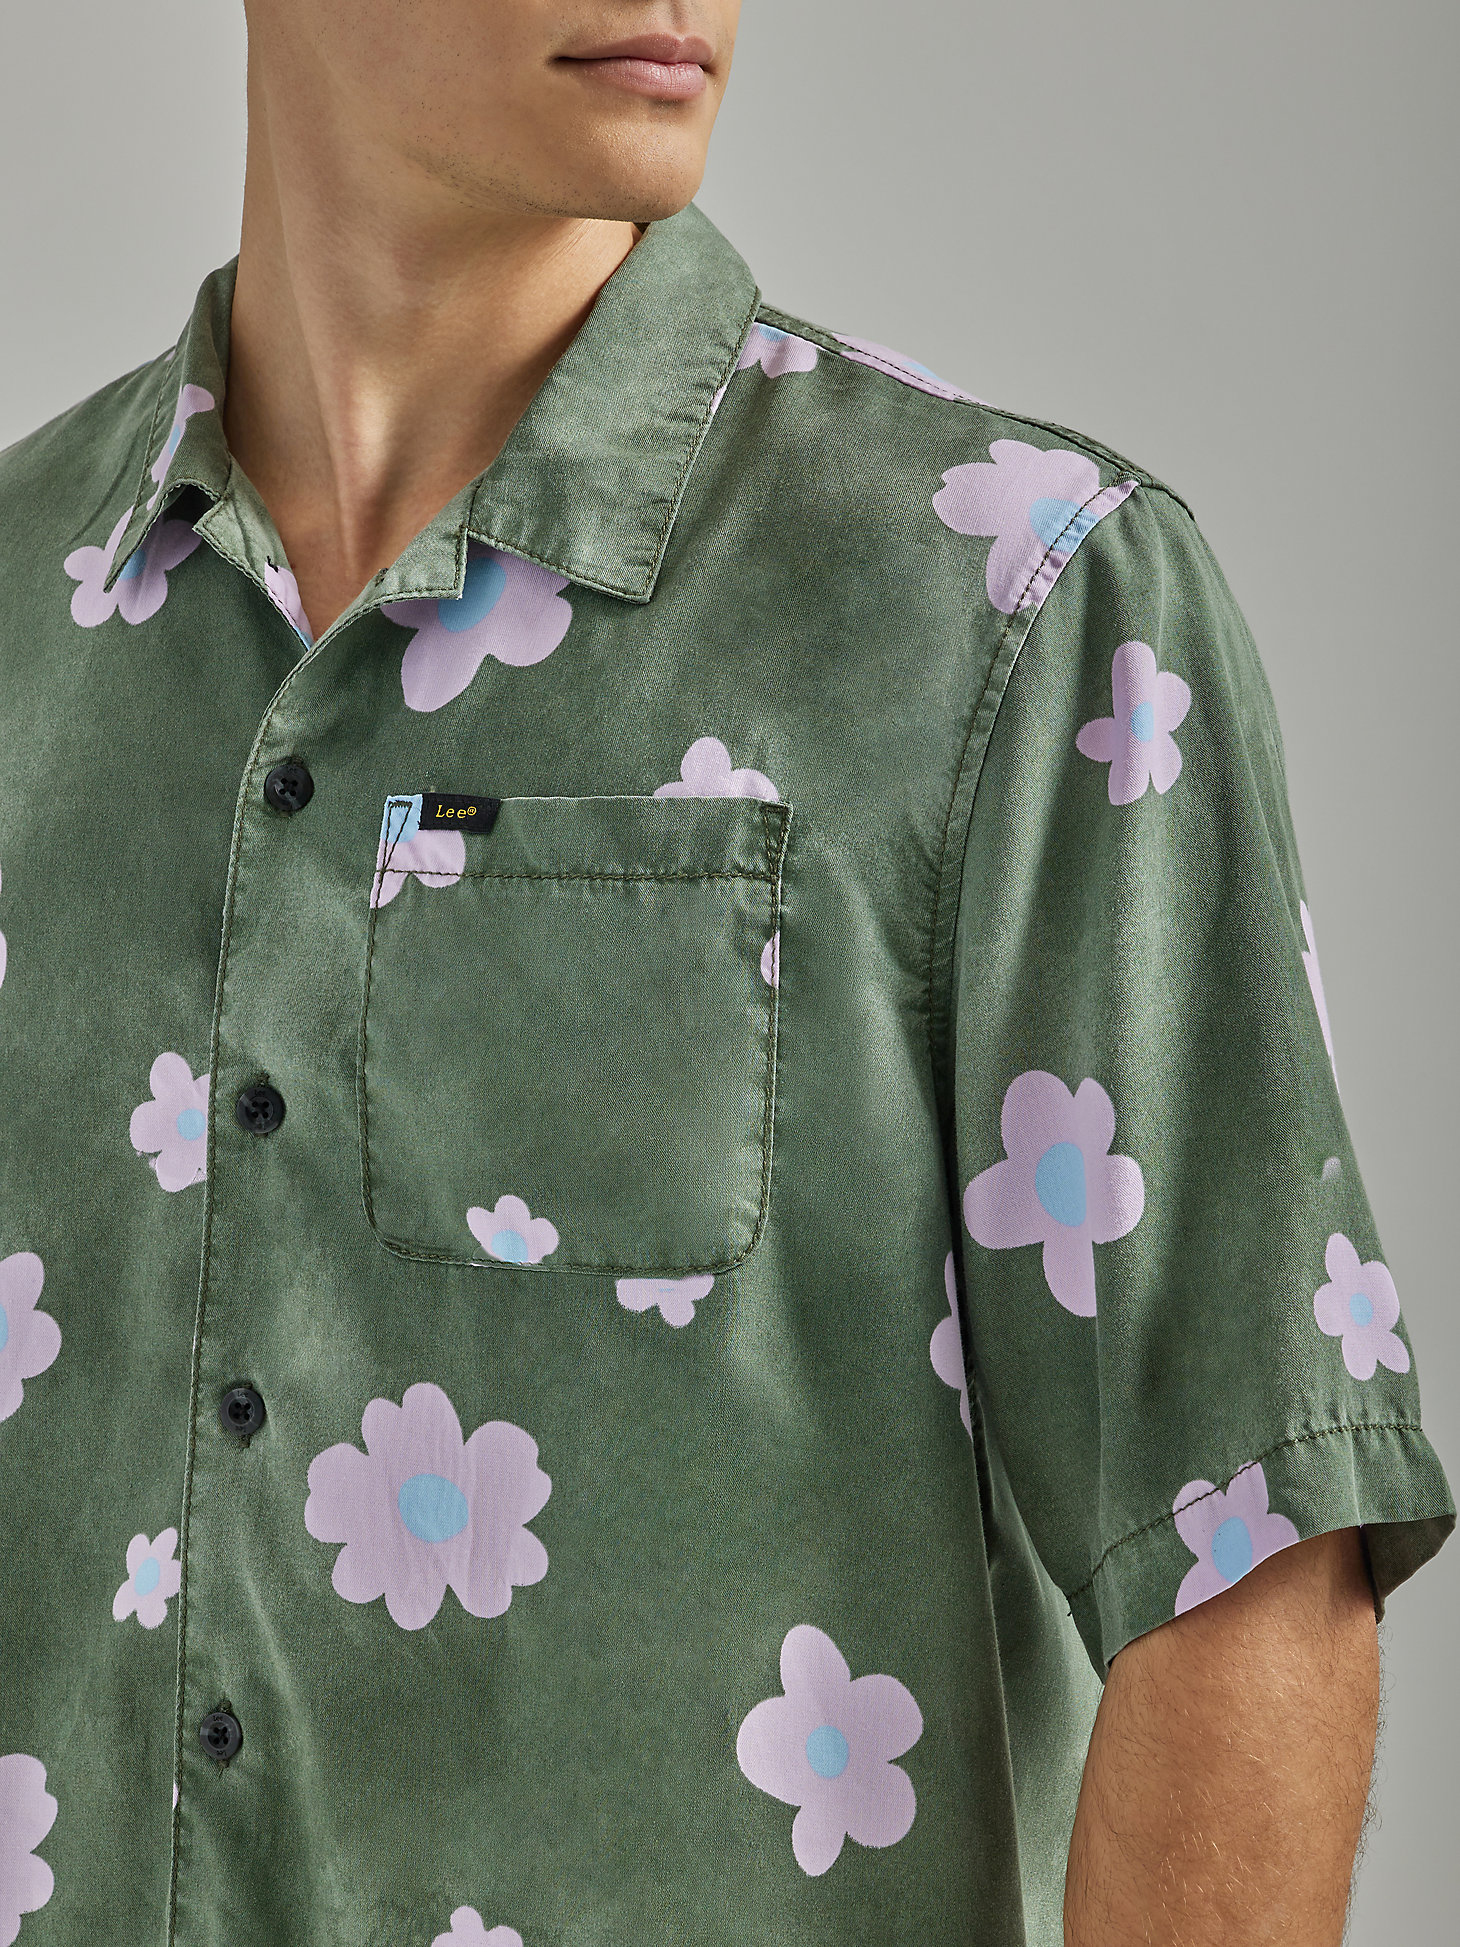 Men's Oversized Floral Shirt in Fort Green Floral alternative view 3